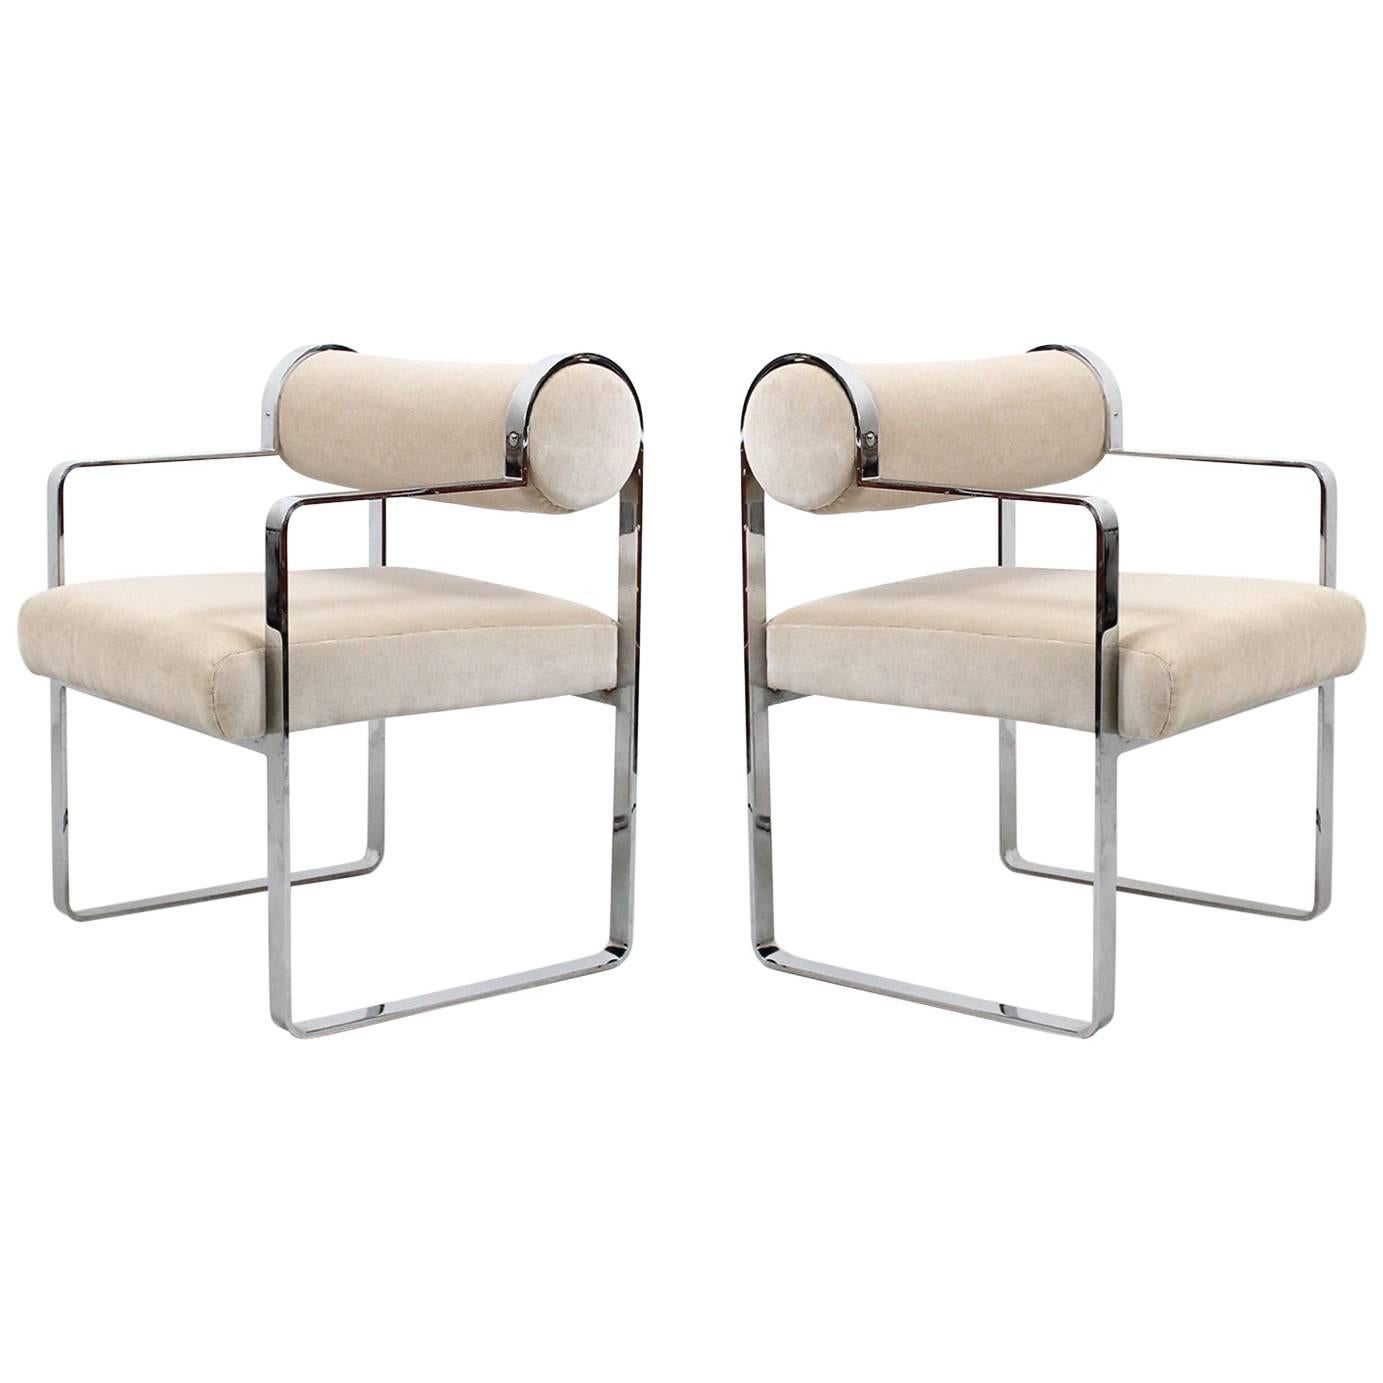 Pair of Minimalist Armchairs by Pace